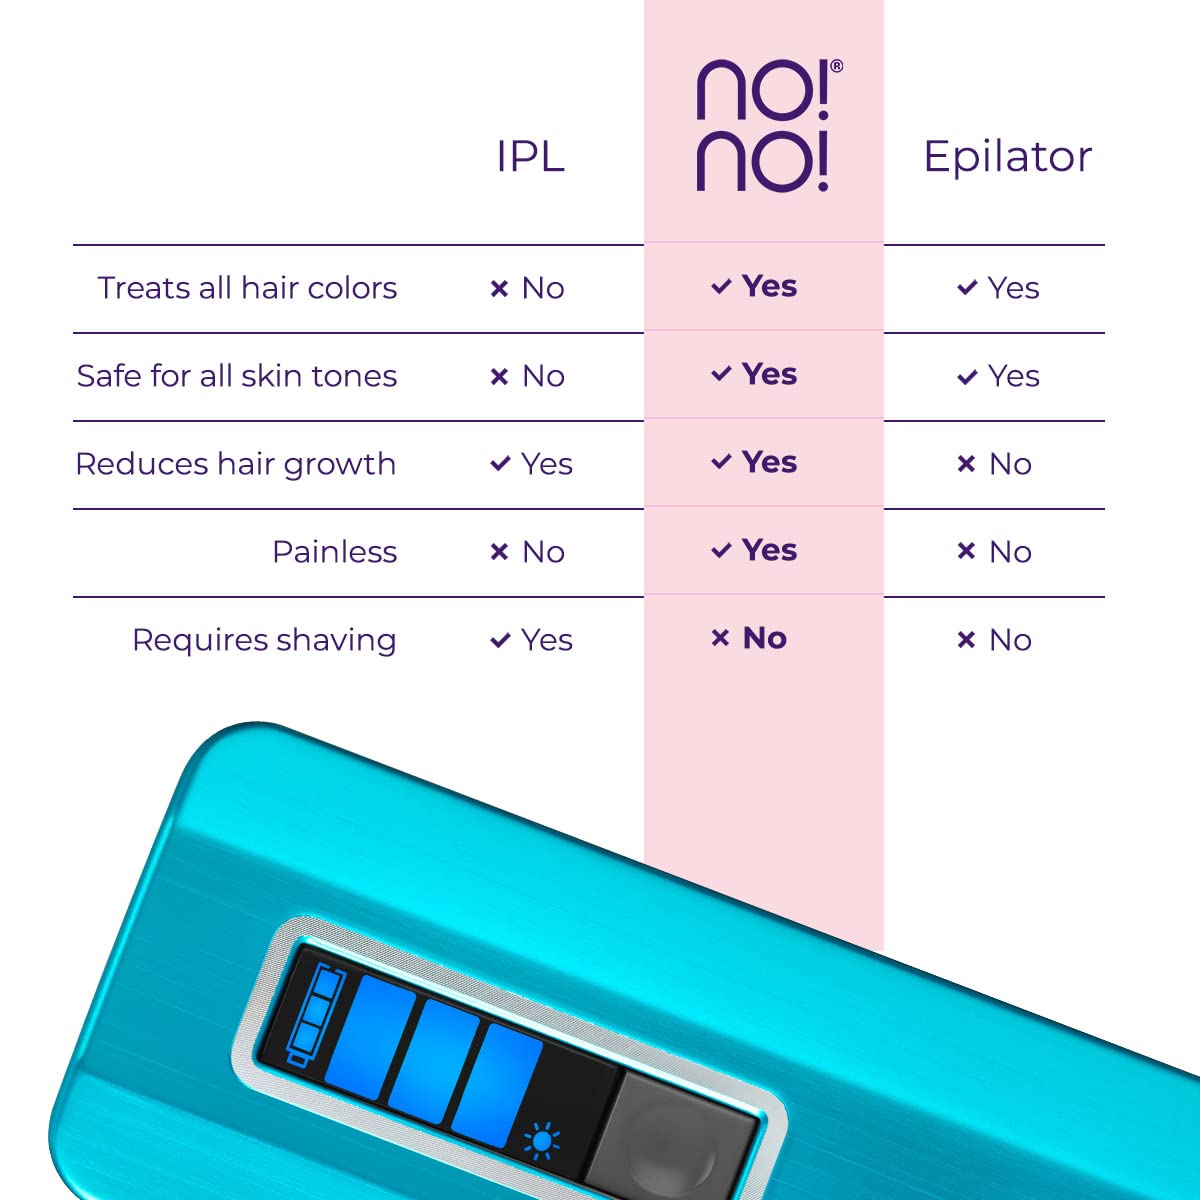 no!no! Pro Hair Removal Device - Treats All Skin Colors and Hair Types - Hair Removal for Women and Men - Flawless Hair Remover for Face & Body Hair - Blue